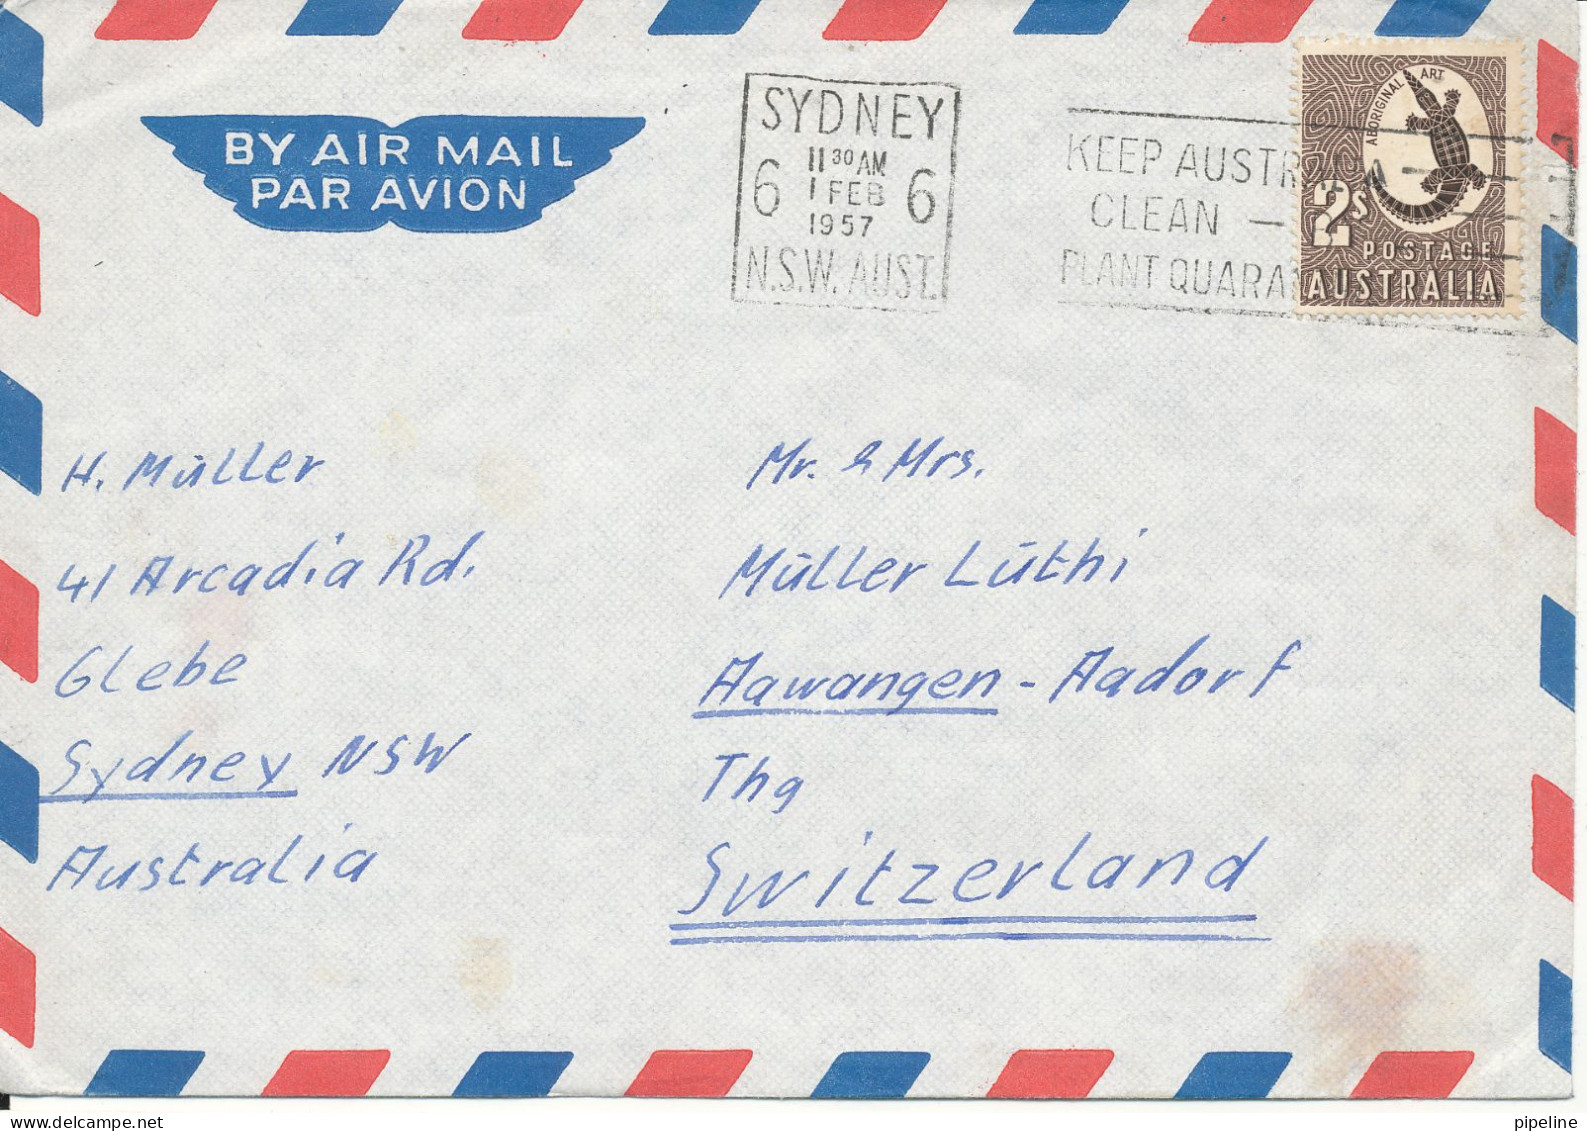 Australia Air Mail Cover Sent To Switzerland Sydney 1-2-1957 - Covers & Documents